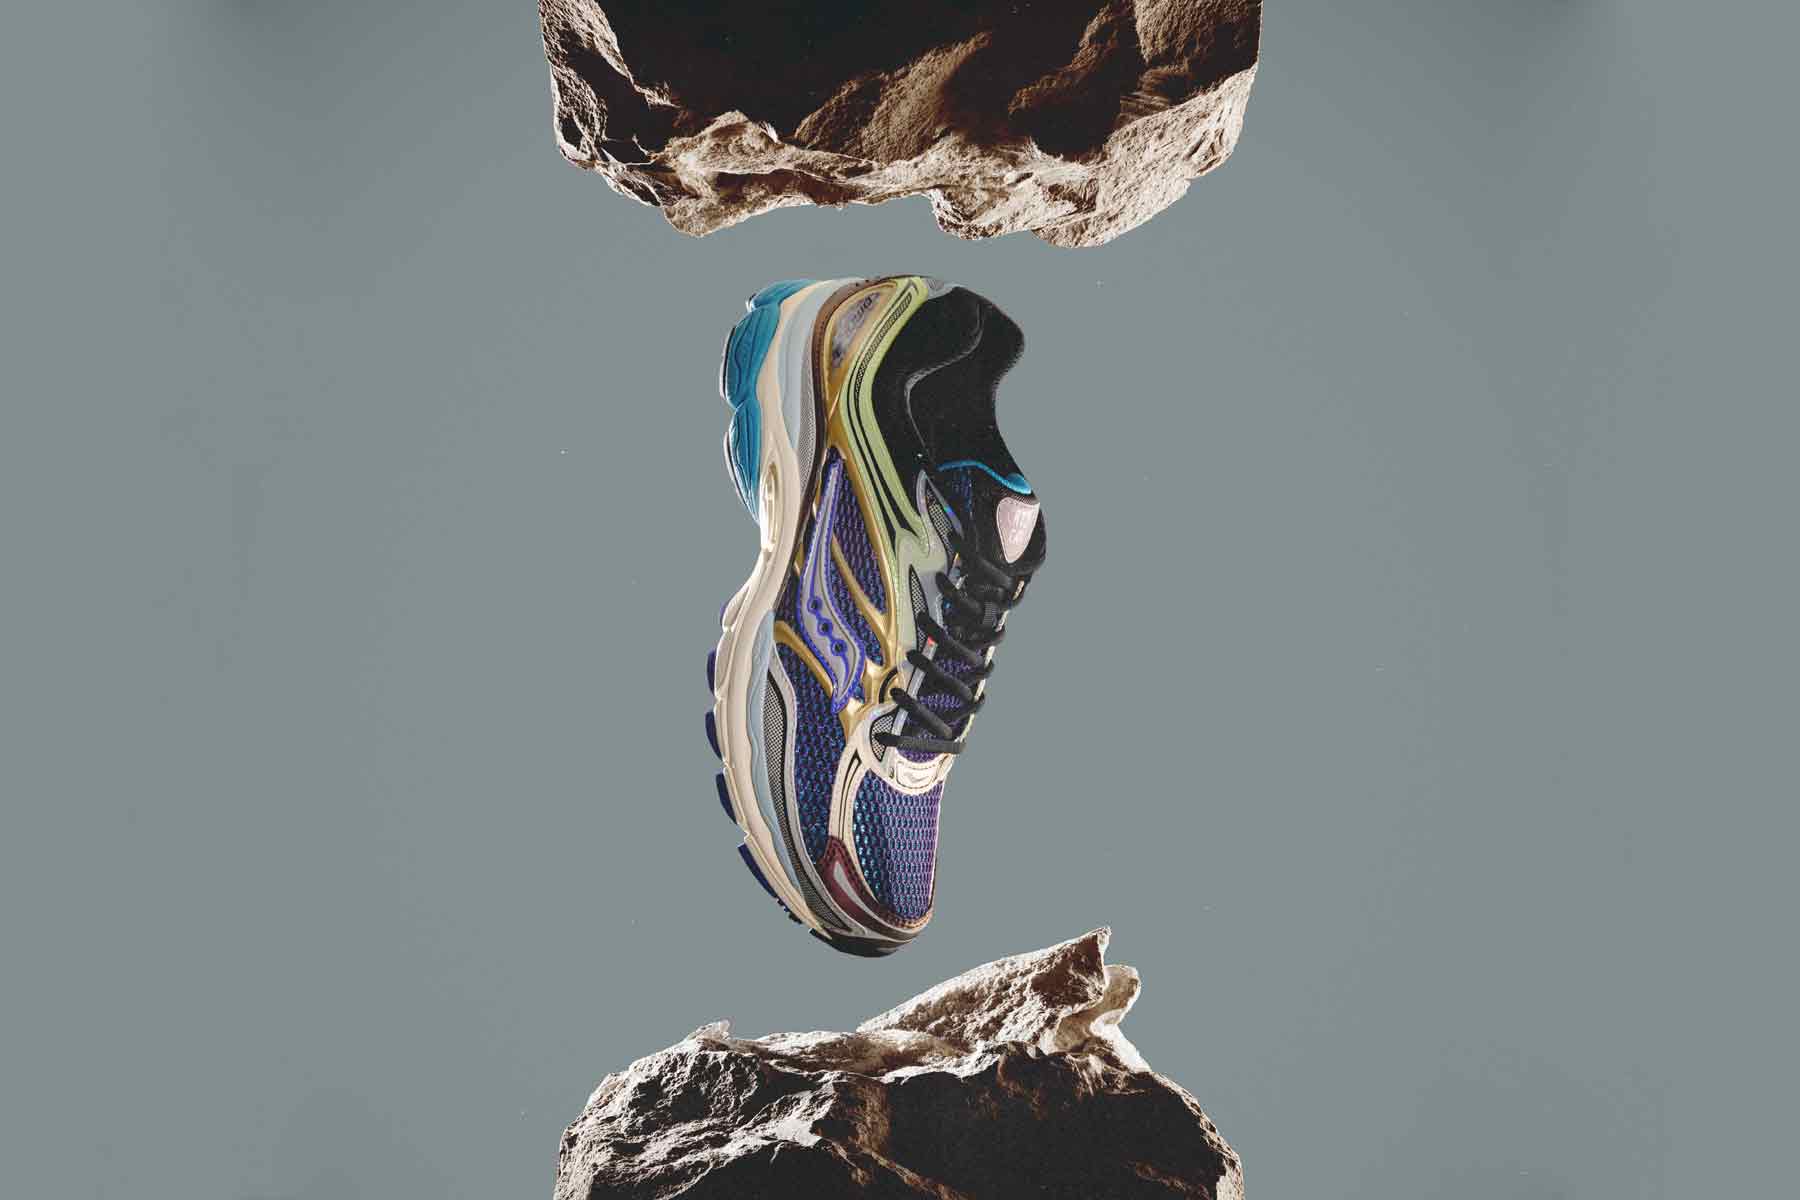 A pair of running shoes hanging from a rock.